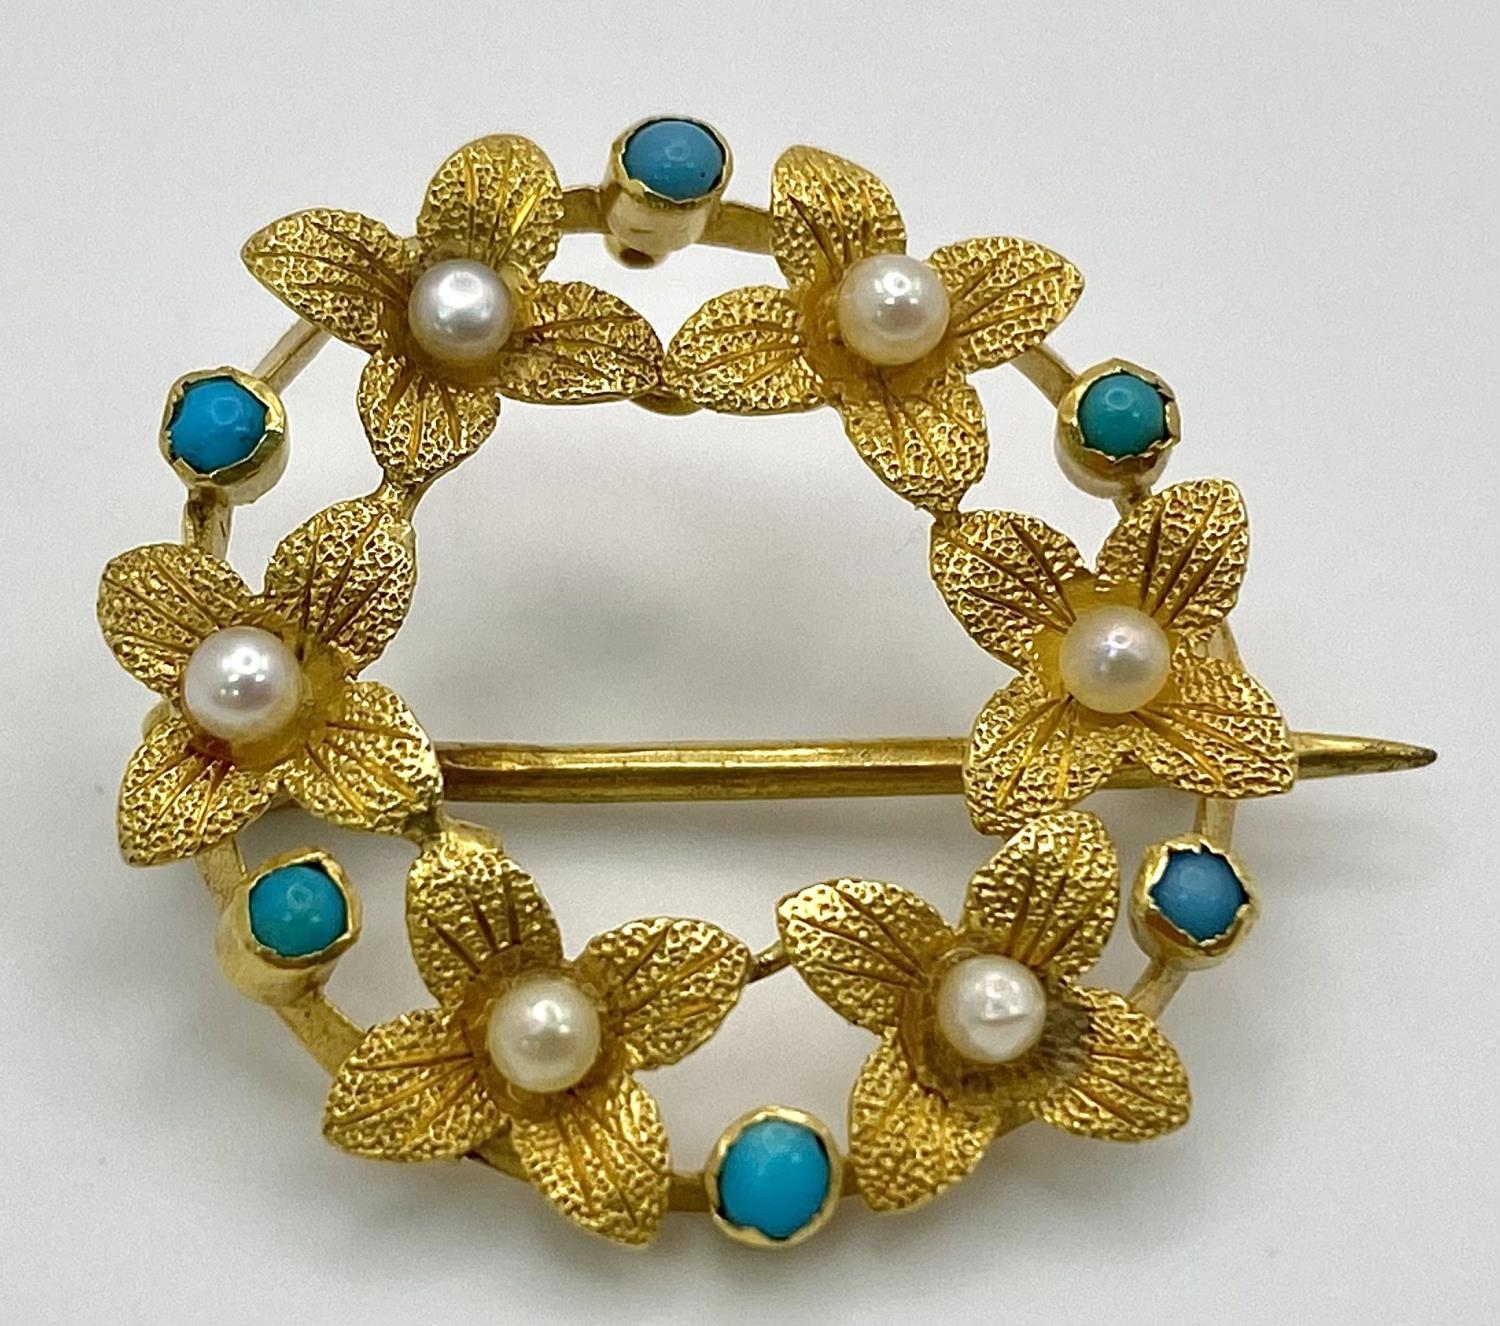 A 15ct Gold Small Wreath Brooch. Seed pearl and turquoise decoration. 22mm. 2.6g total weight.